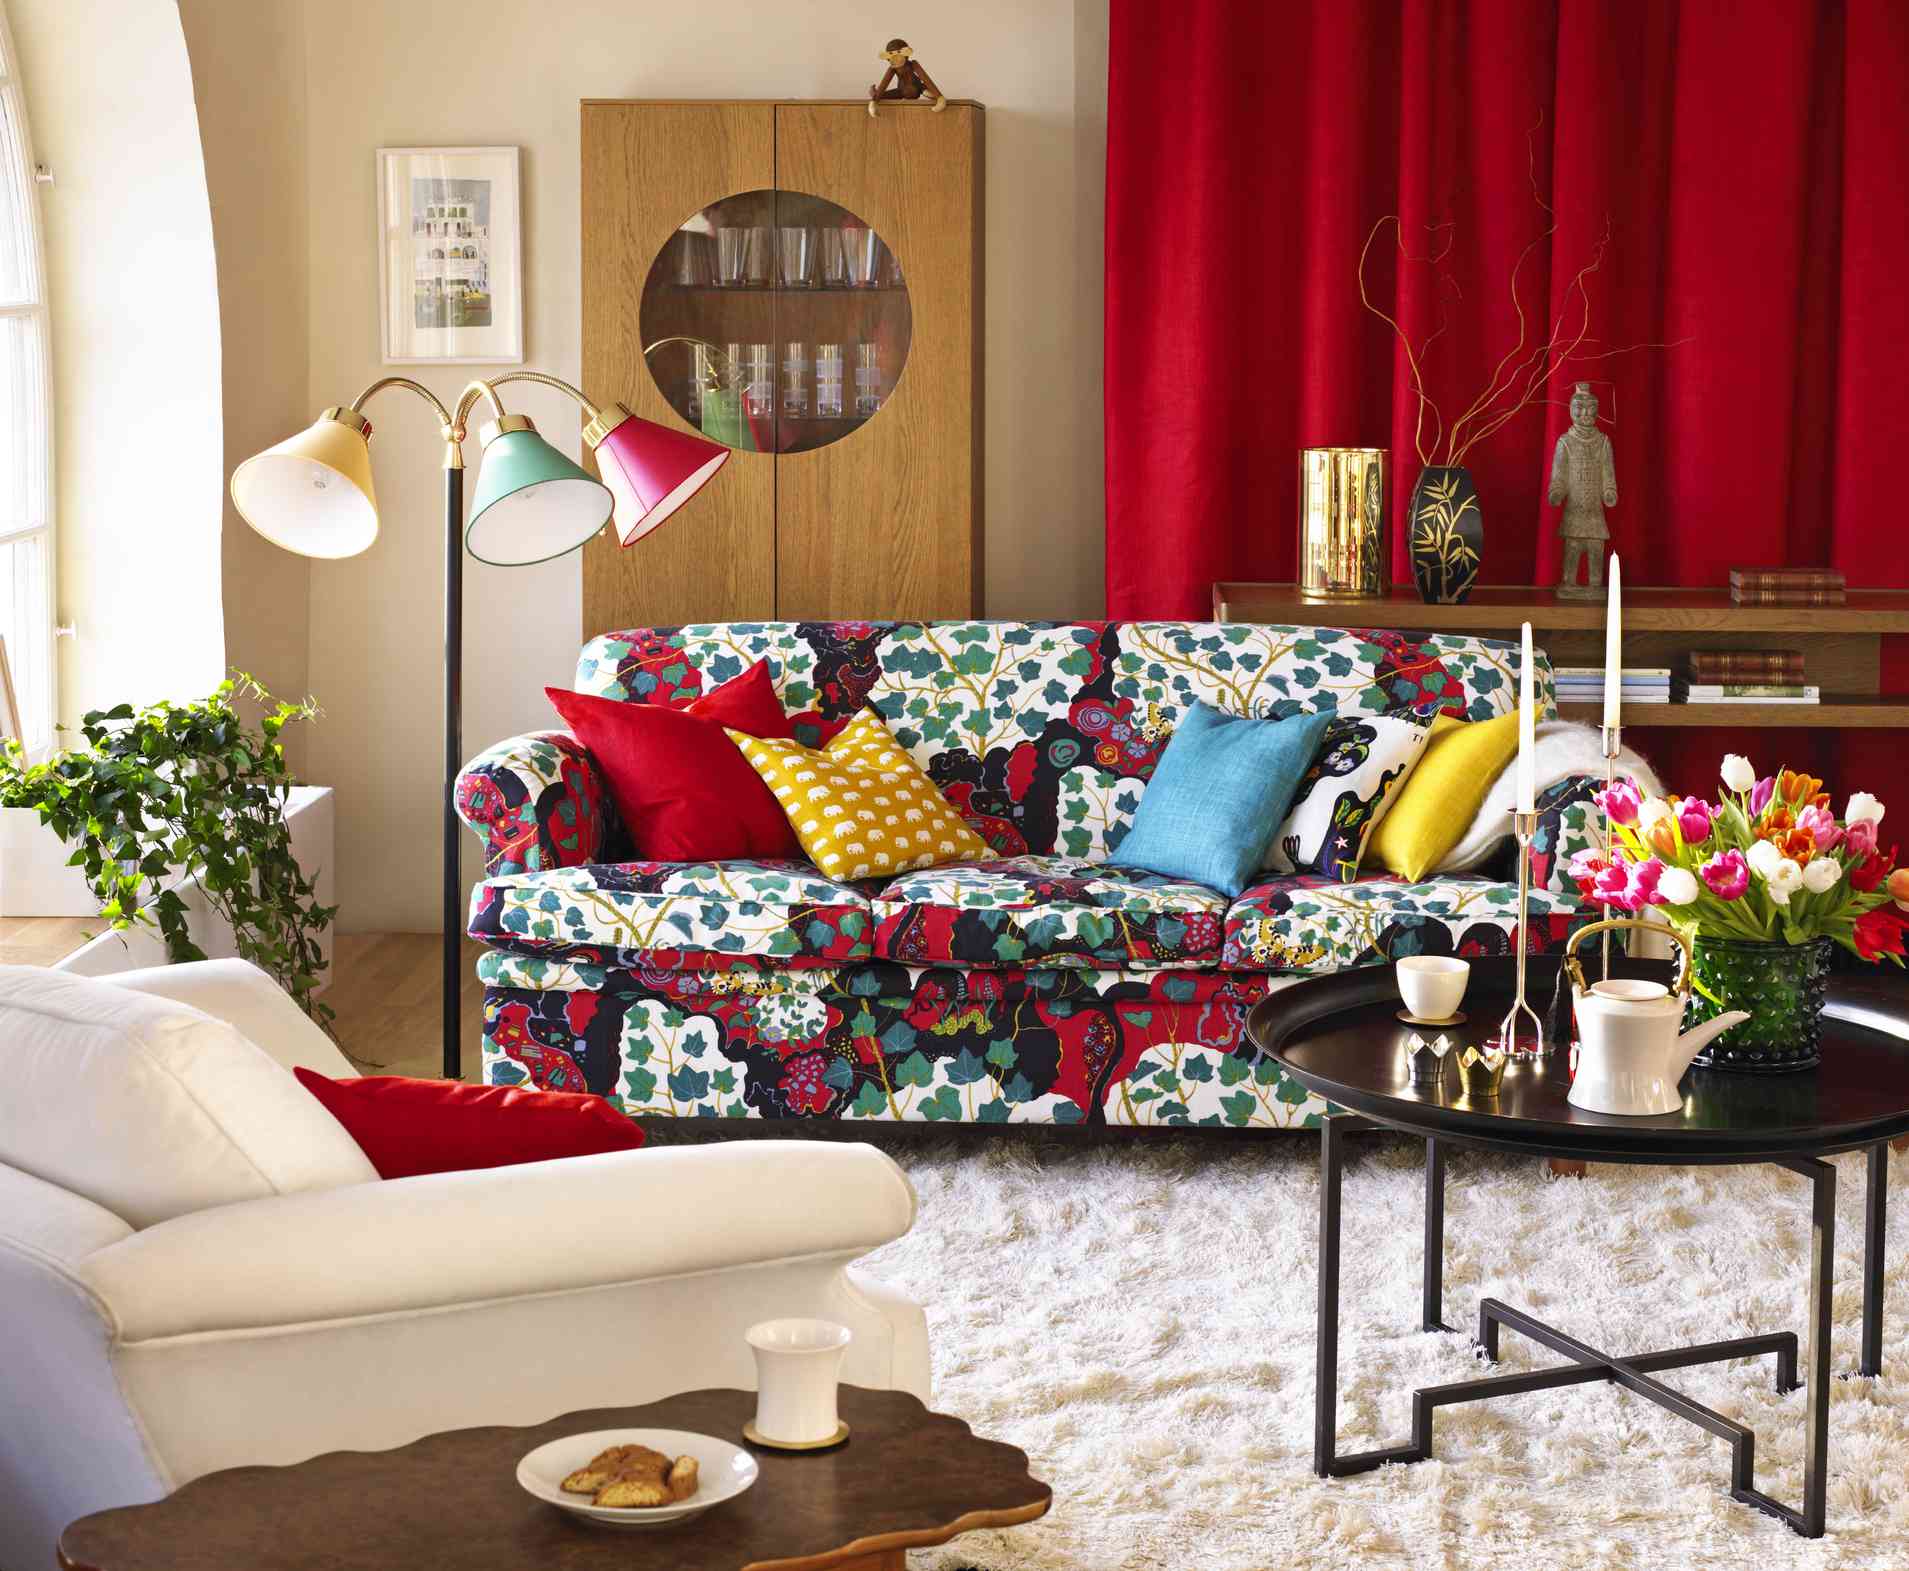 3. Introduce red in fabric and upholstery